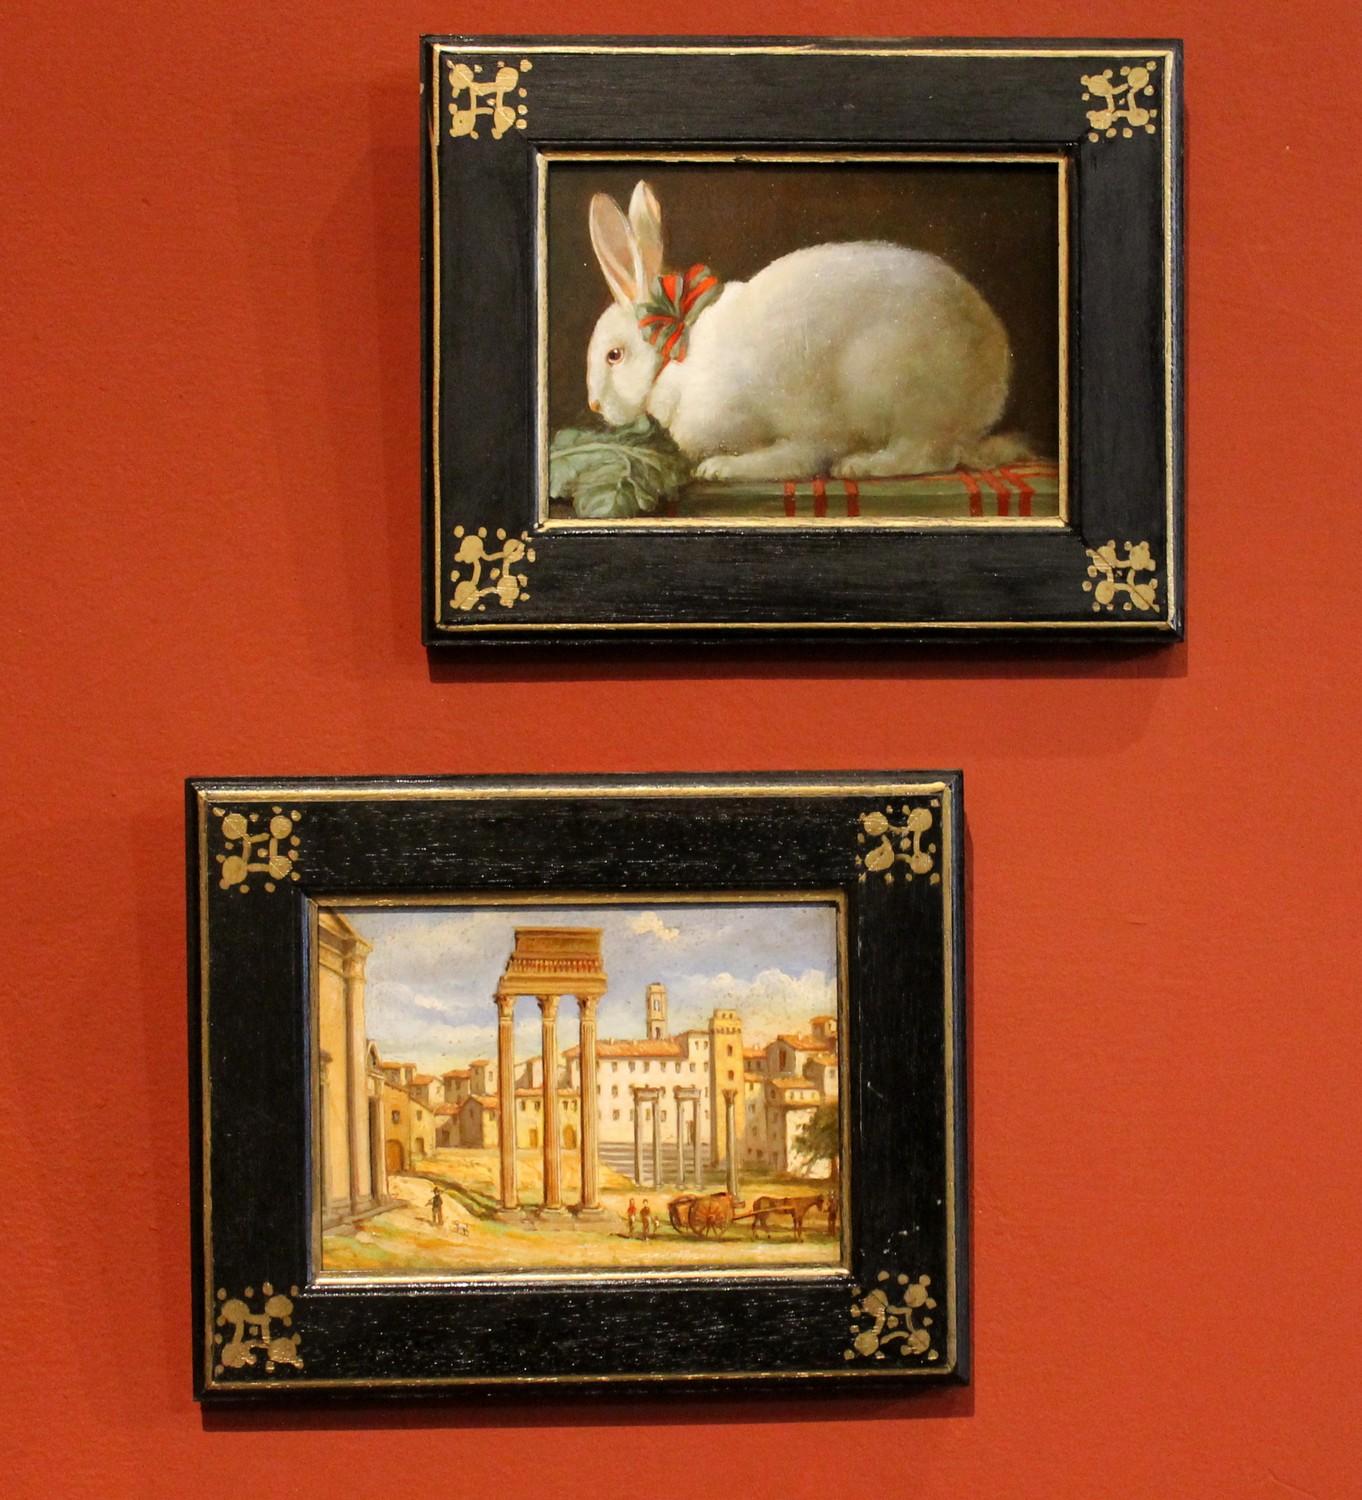 Italian Late 19th Century Oil on Board Still Life Painting with a Bunny 3